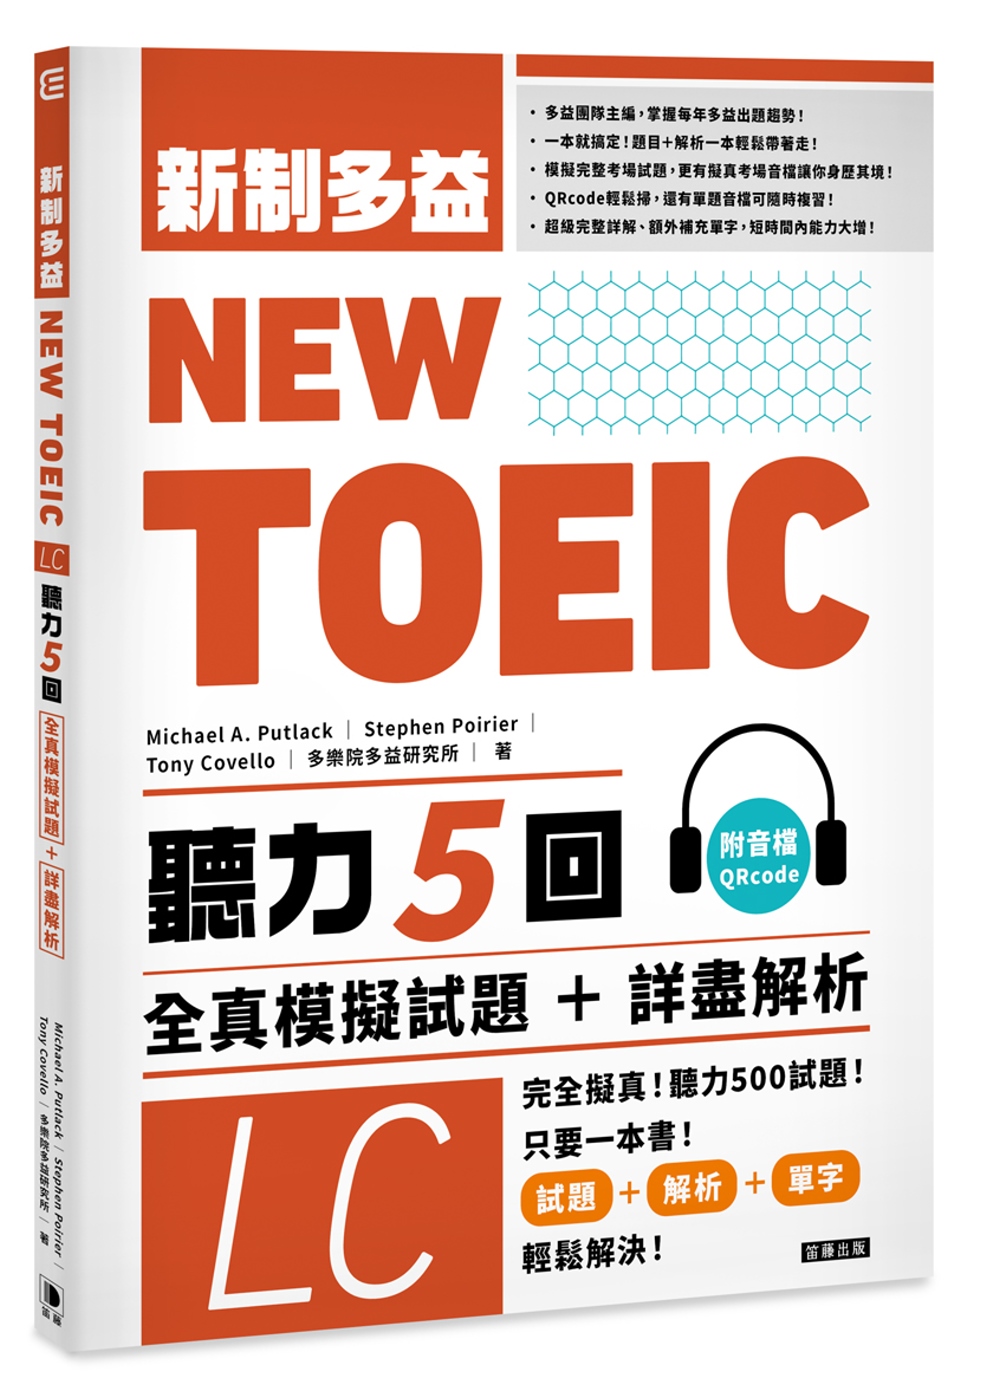 NEW TOEIC新制多益 聽力...